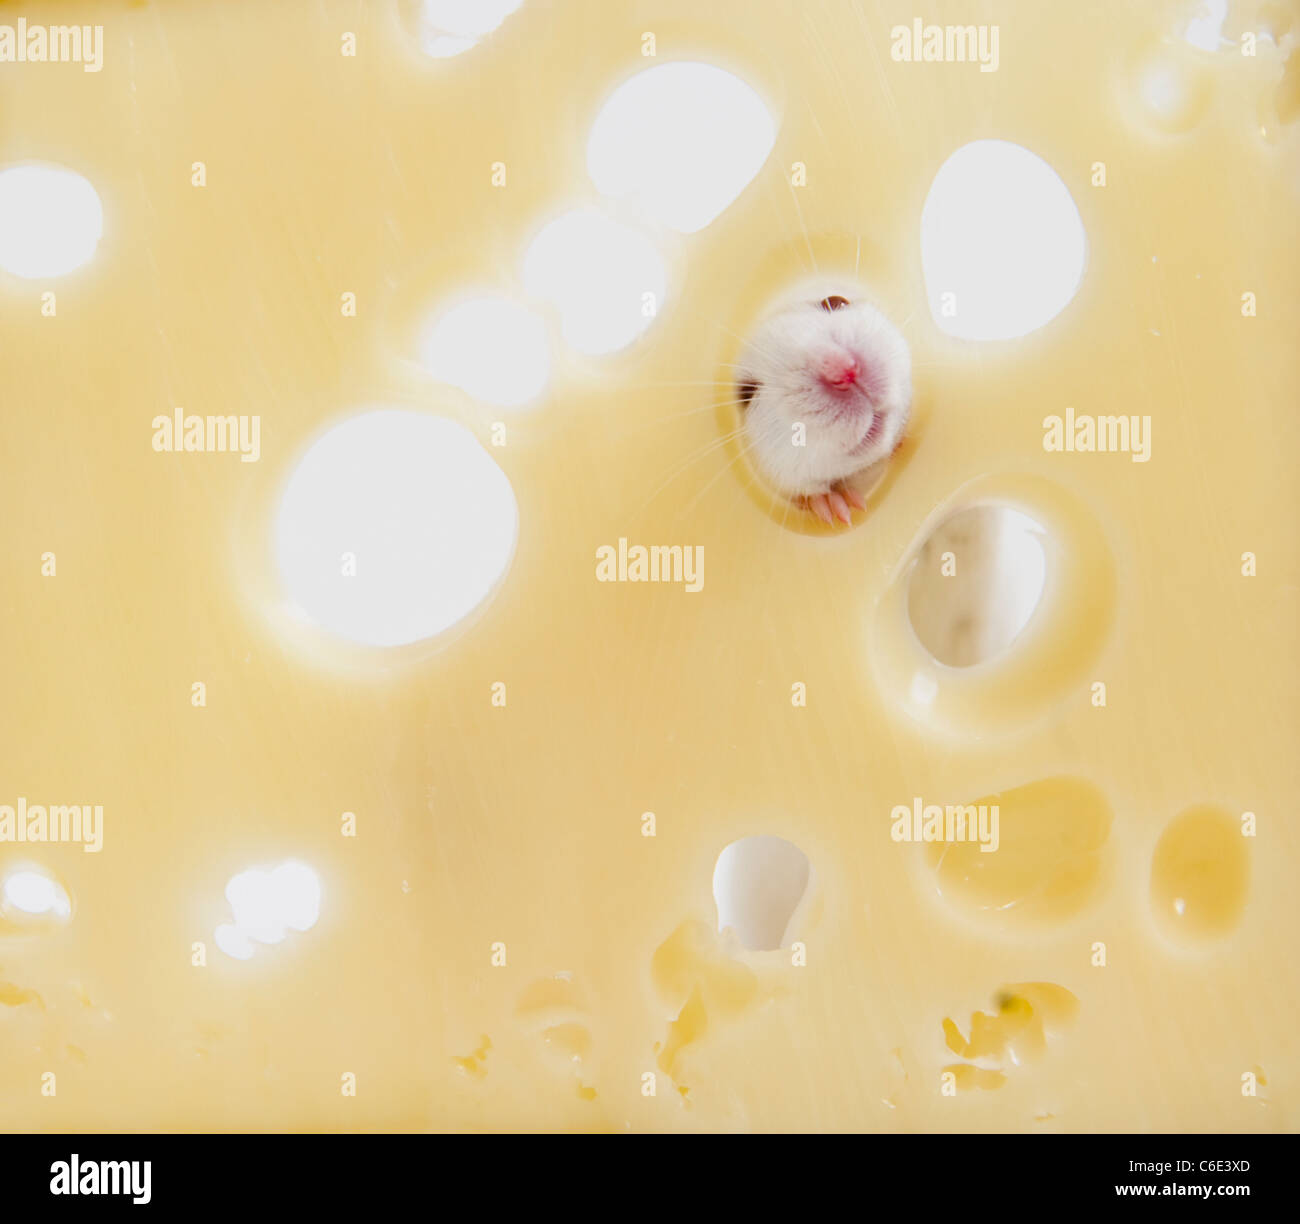 Studio shot of white mouse looking through hole in swiss cheese Stock Photo